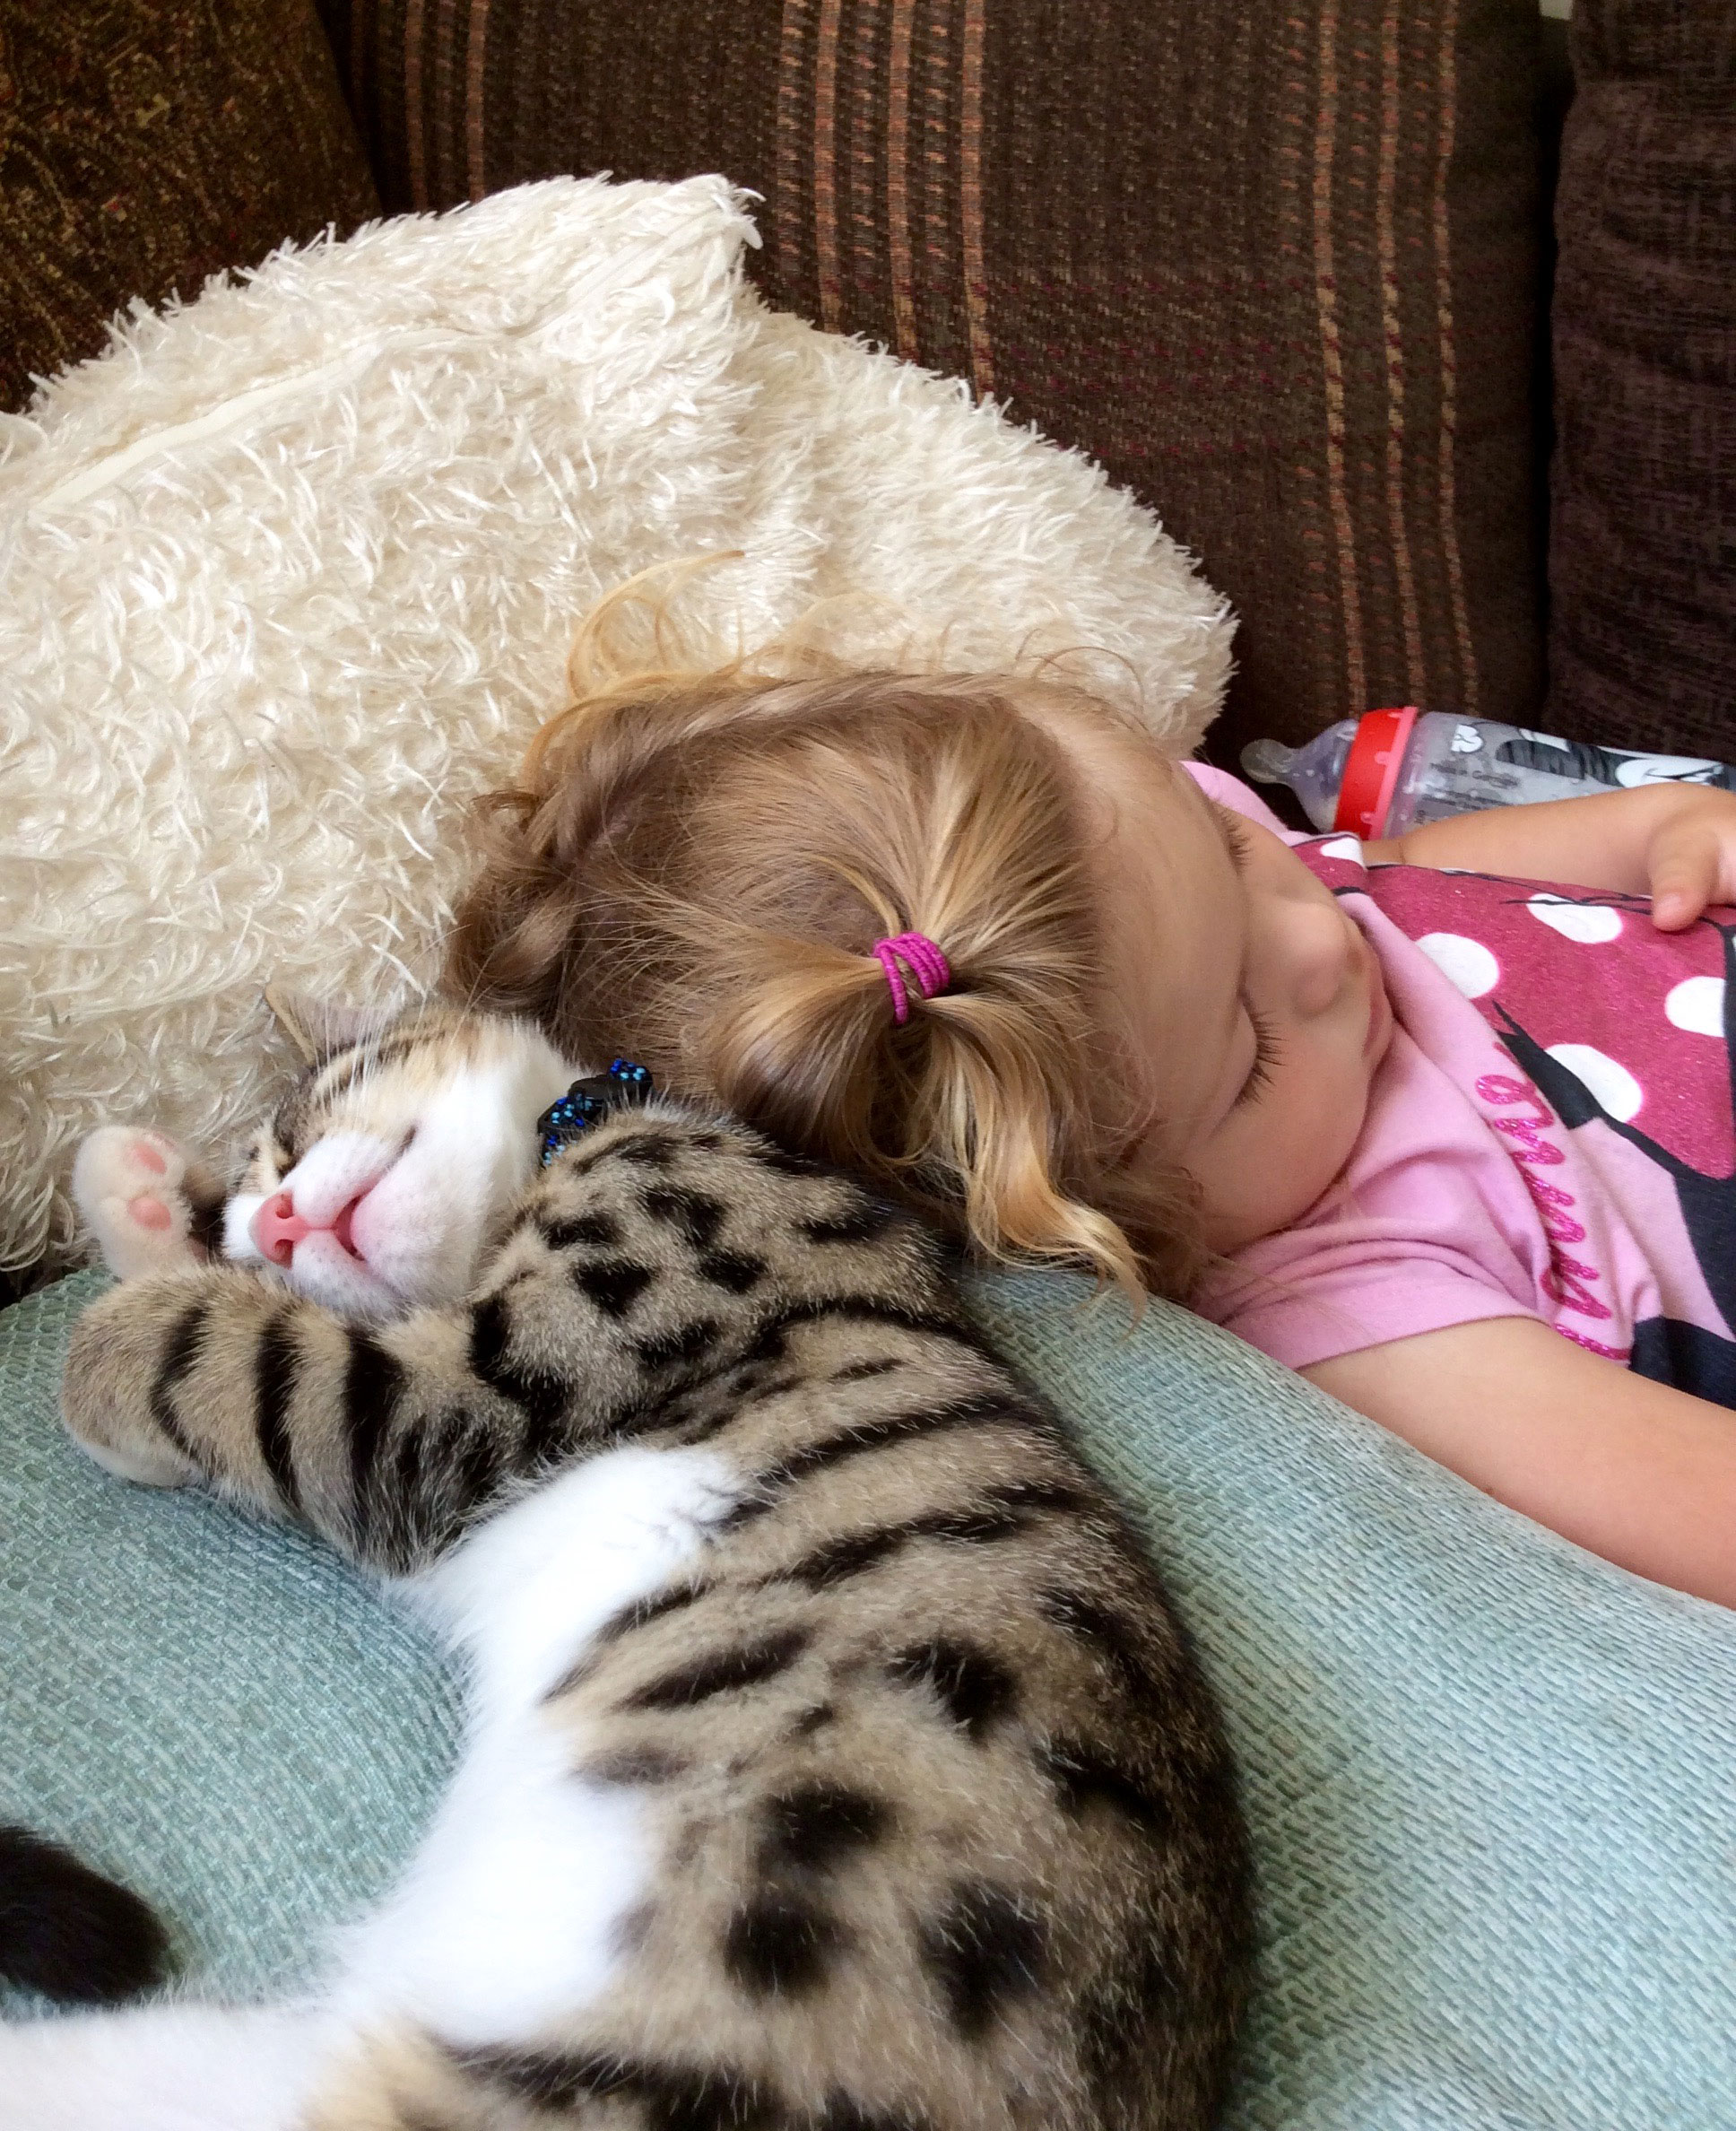 Cuteness Overload cat and little girl sleeping together - JustViral.Net